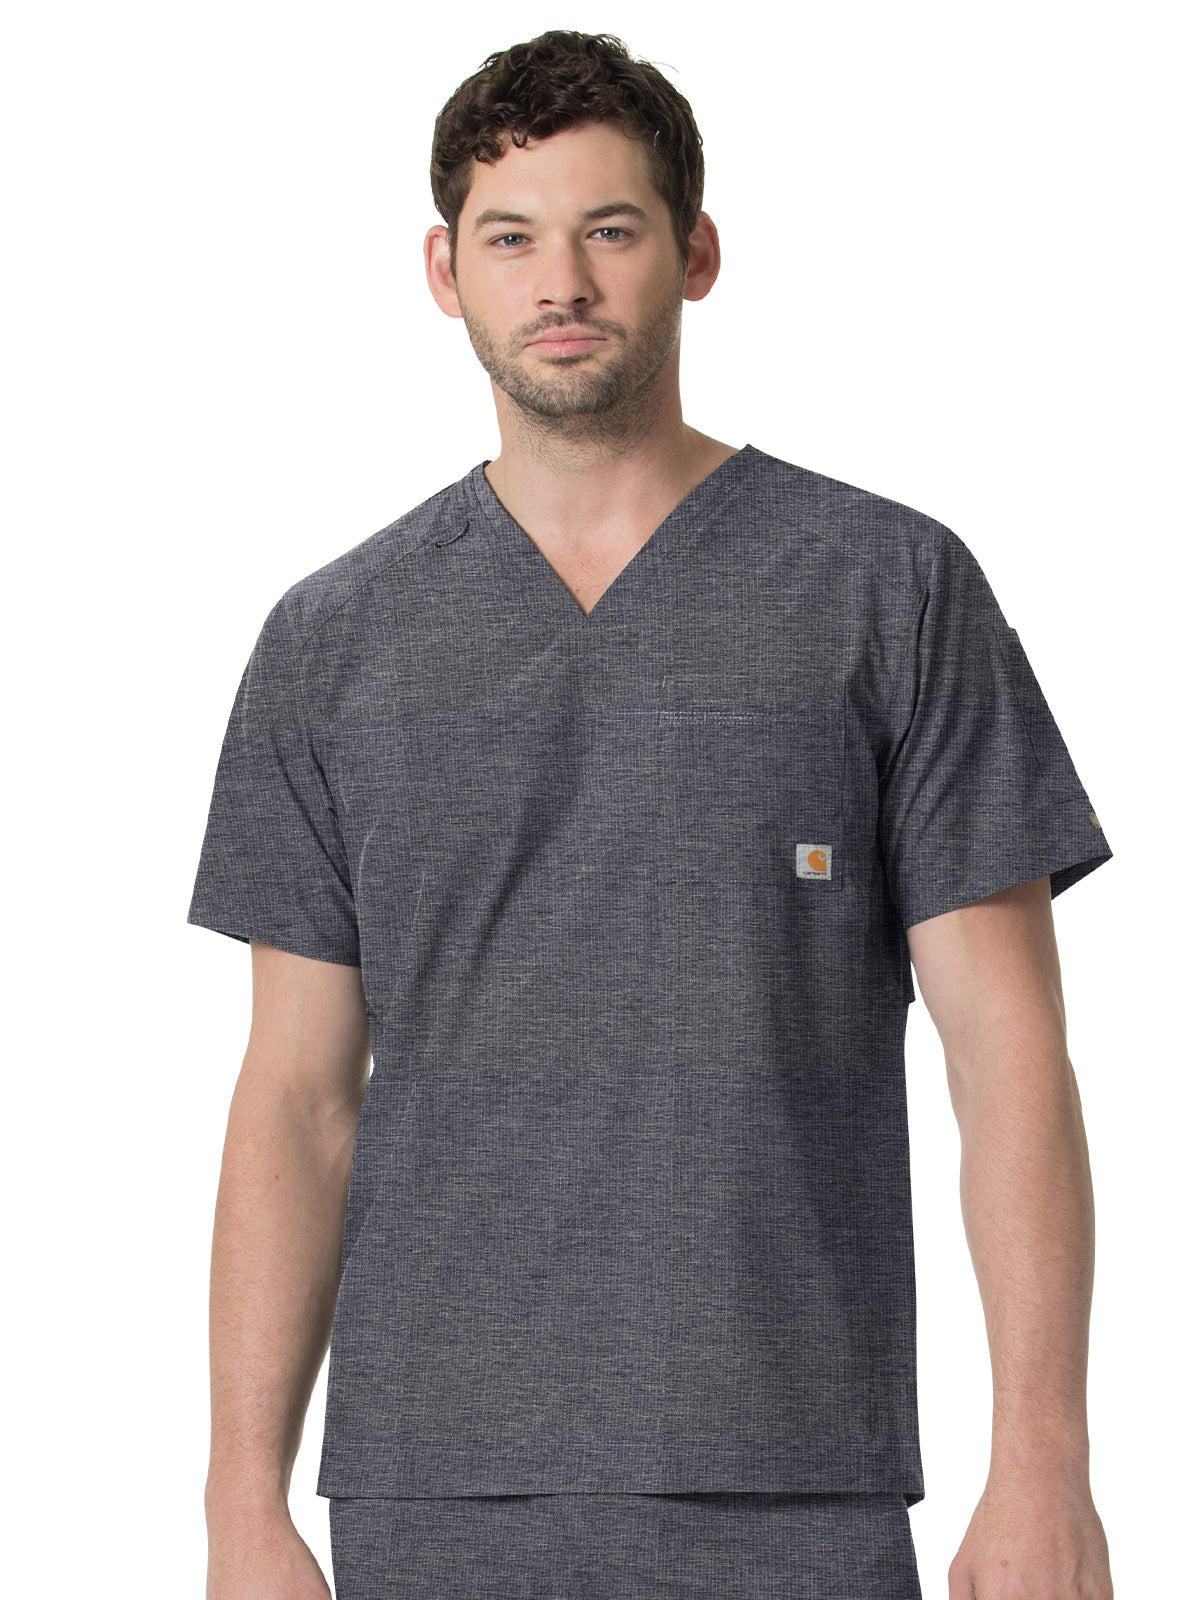 Men's Modern Fit Twill Chest Pocket Top - C15106 - Charcoal Heather